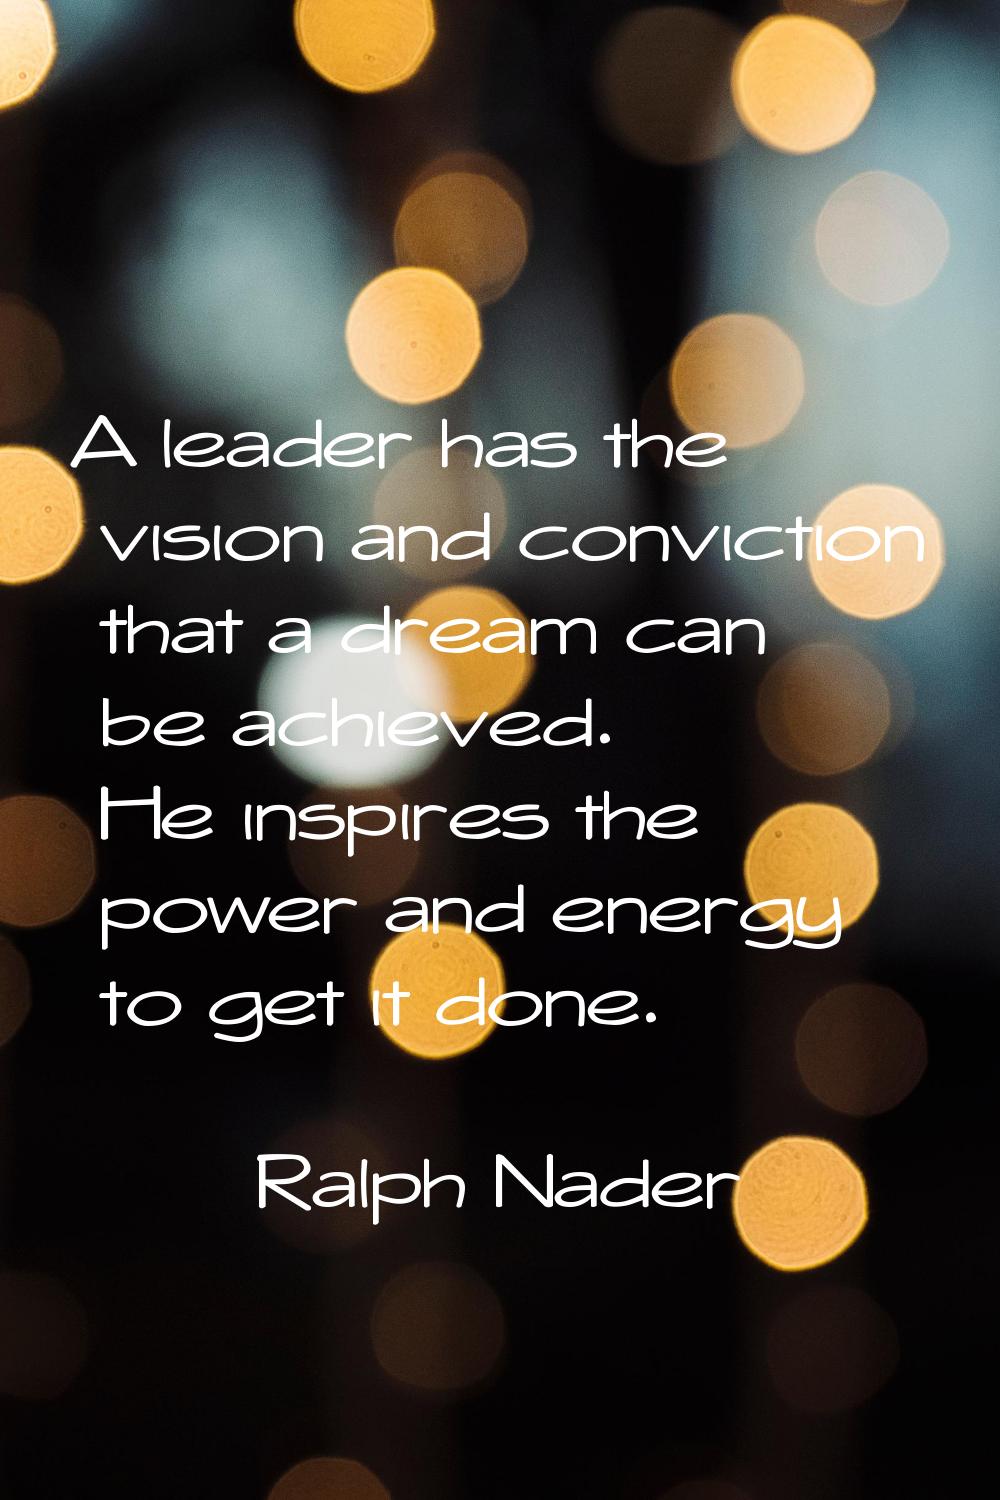 A leader has the vision and conviction that a dream can be achieved. He inspires the power and ener